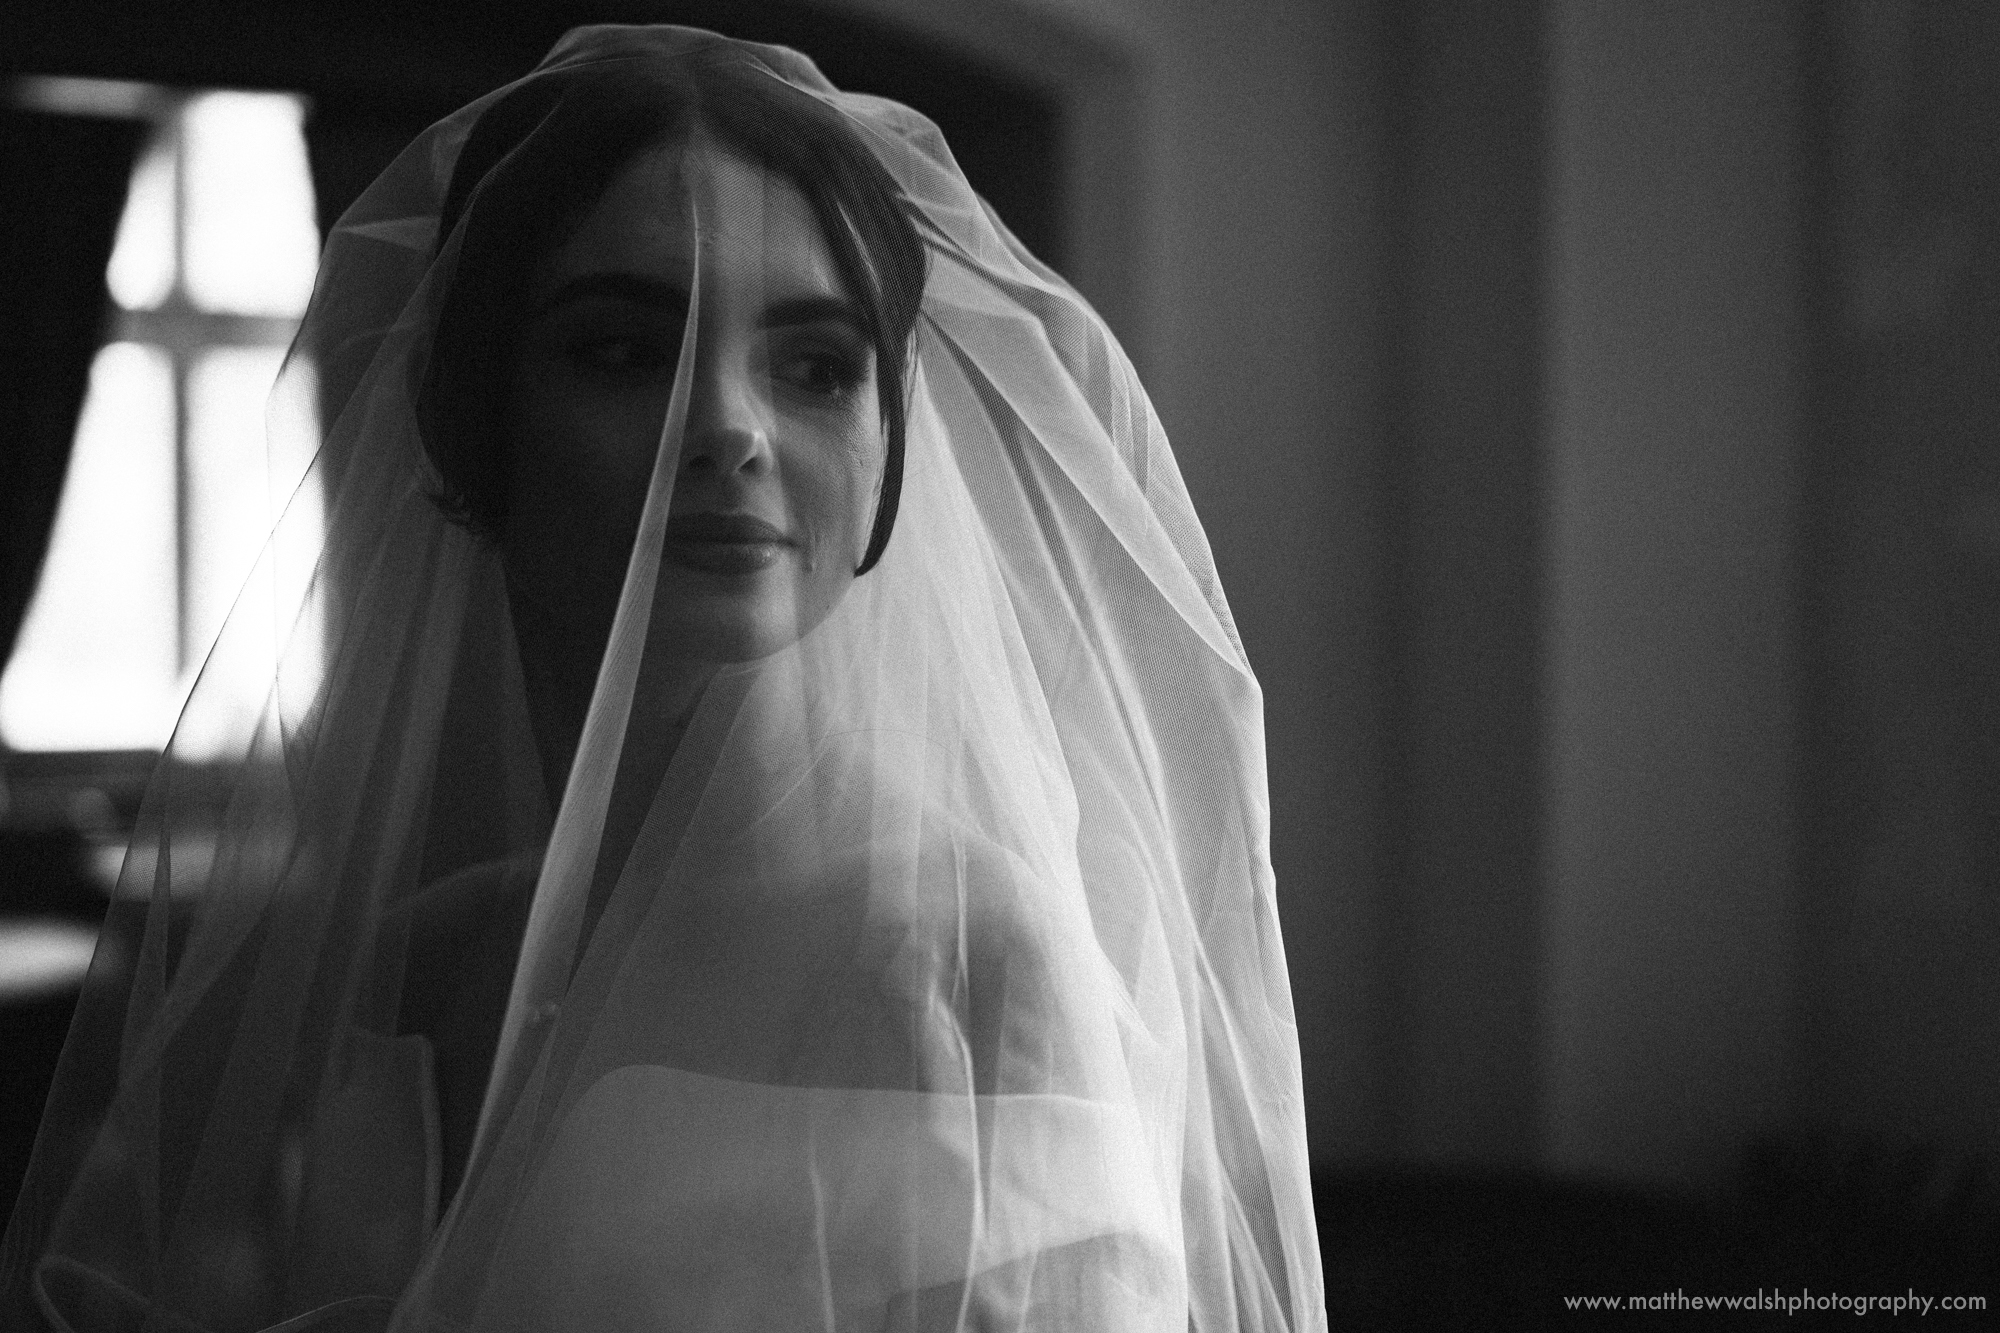 The bride in her veil about to walk down the isle